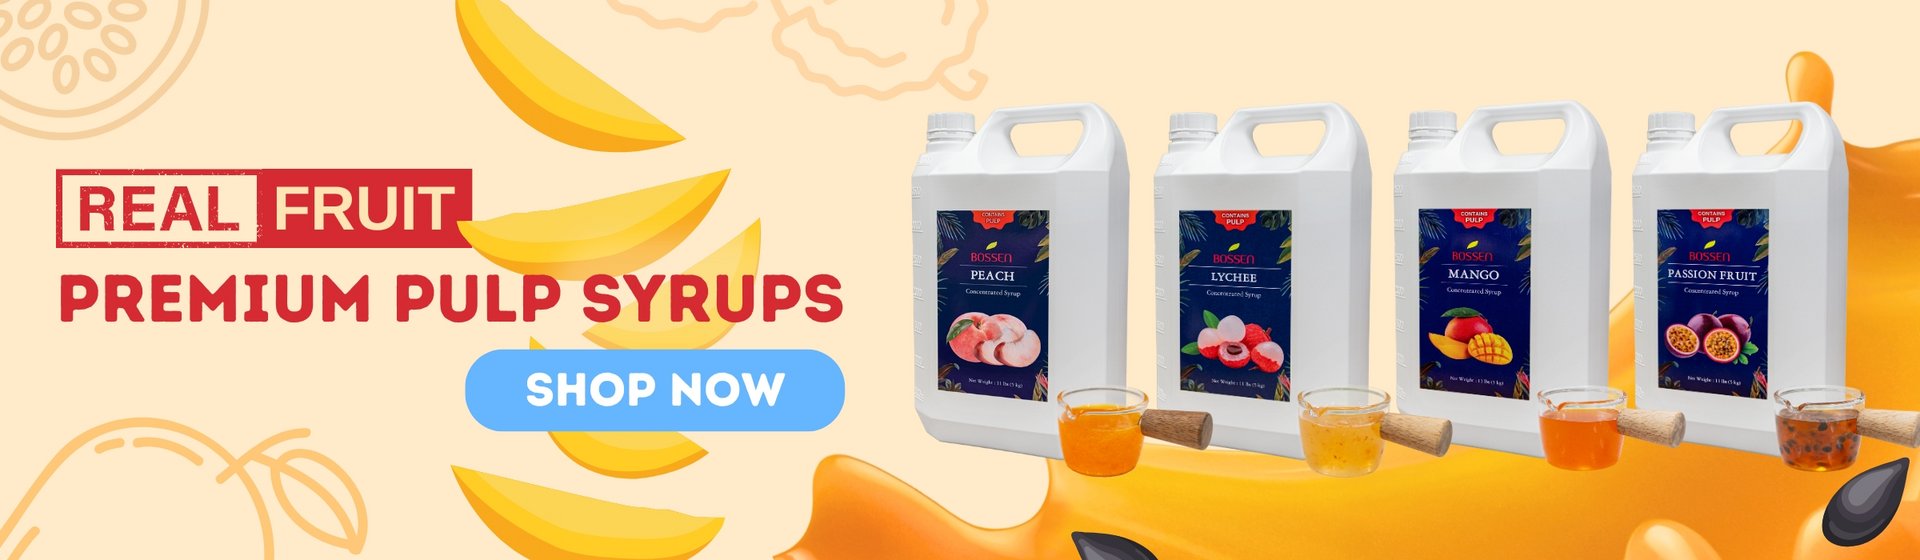 Real Fruit Premium Pulp Syrups. Shop Now